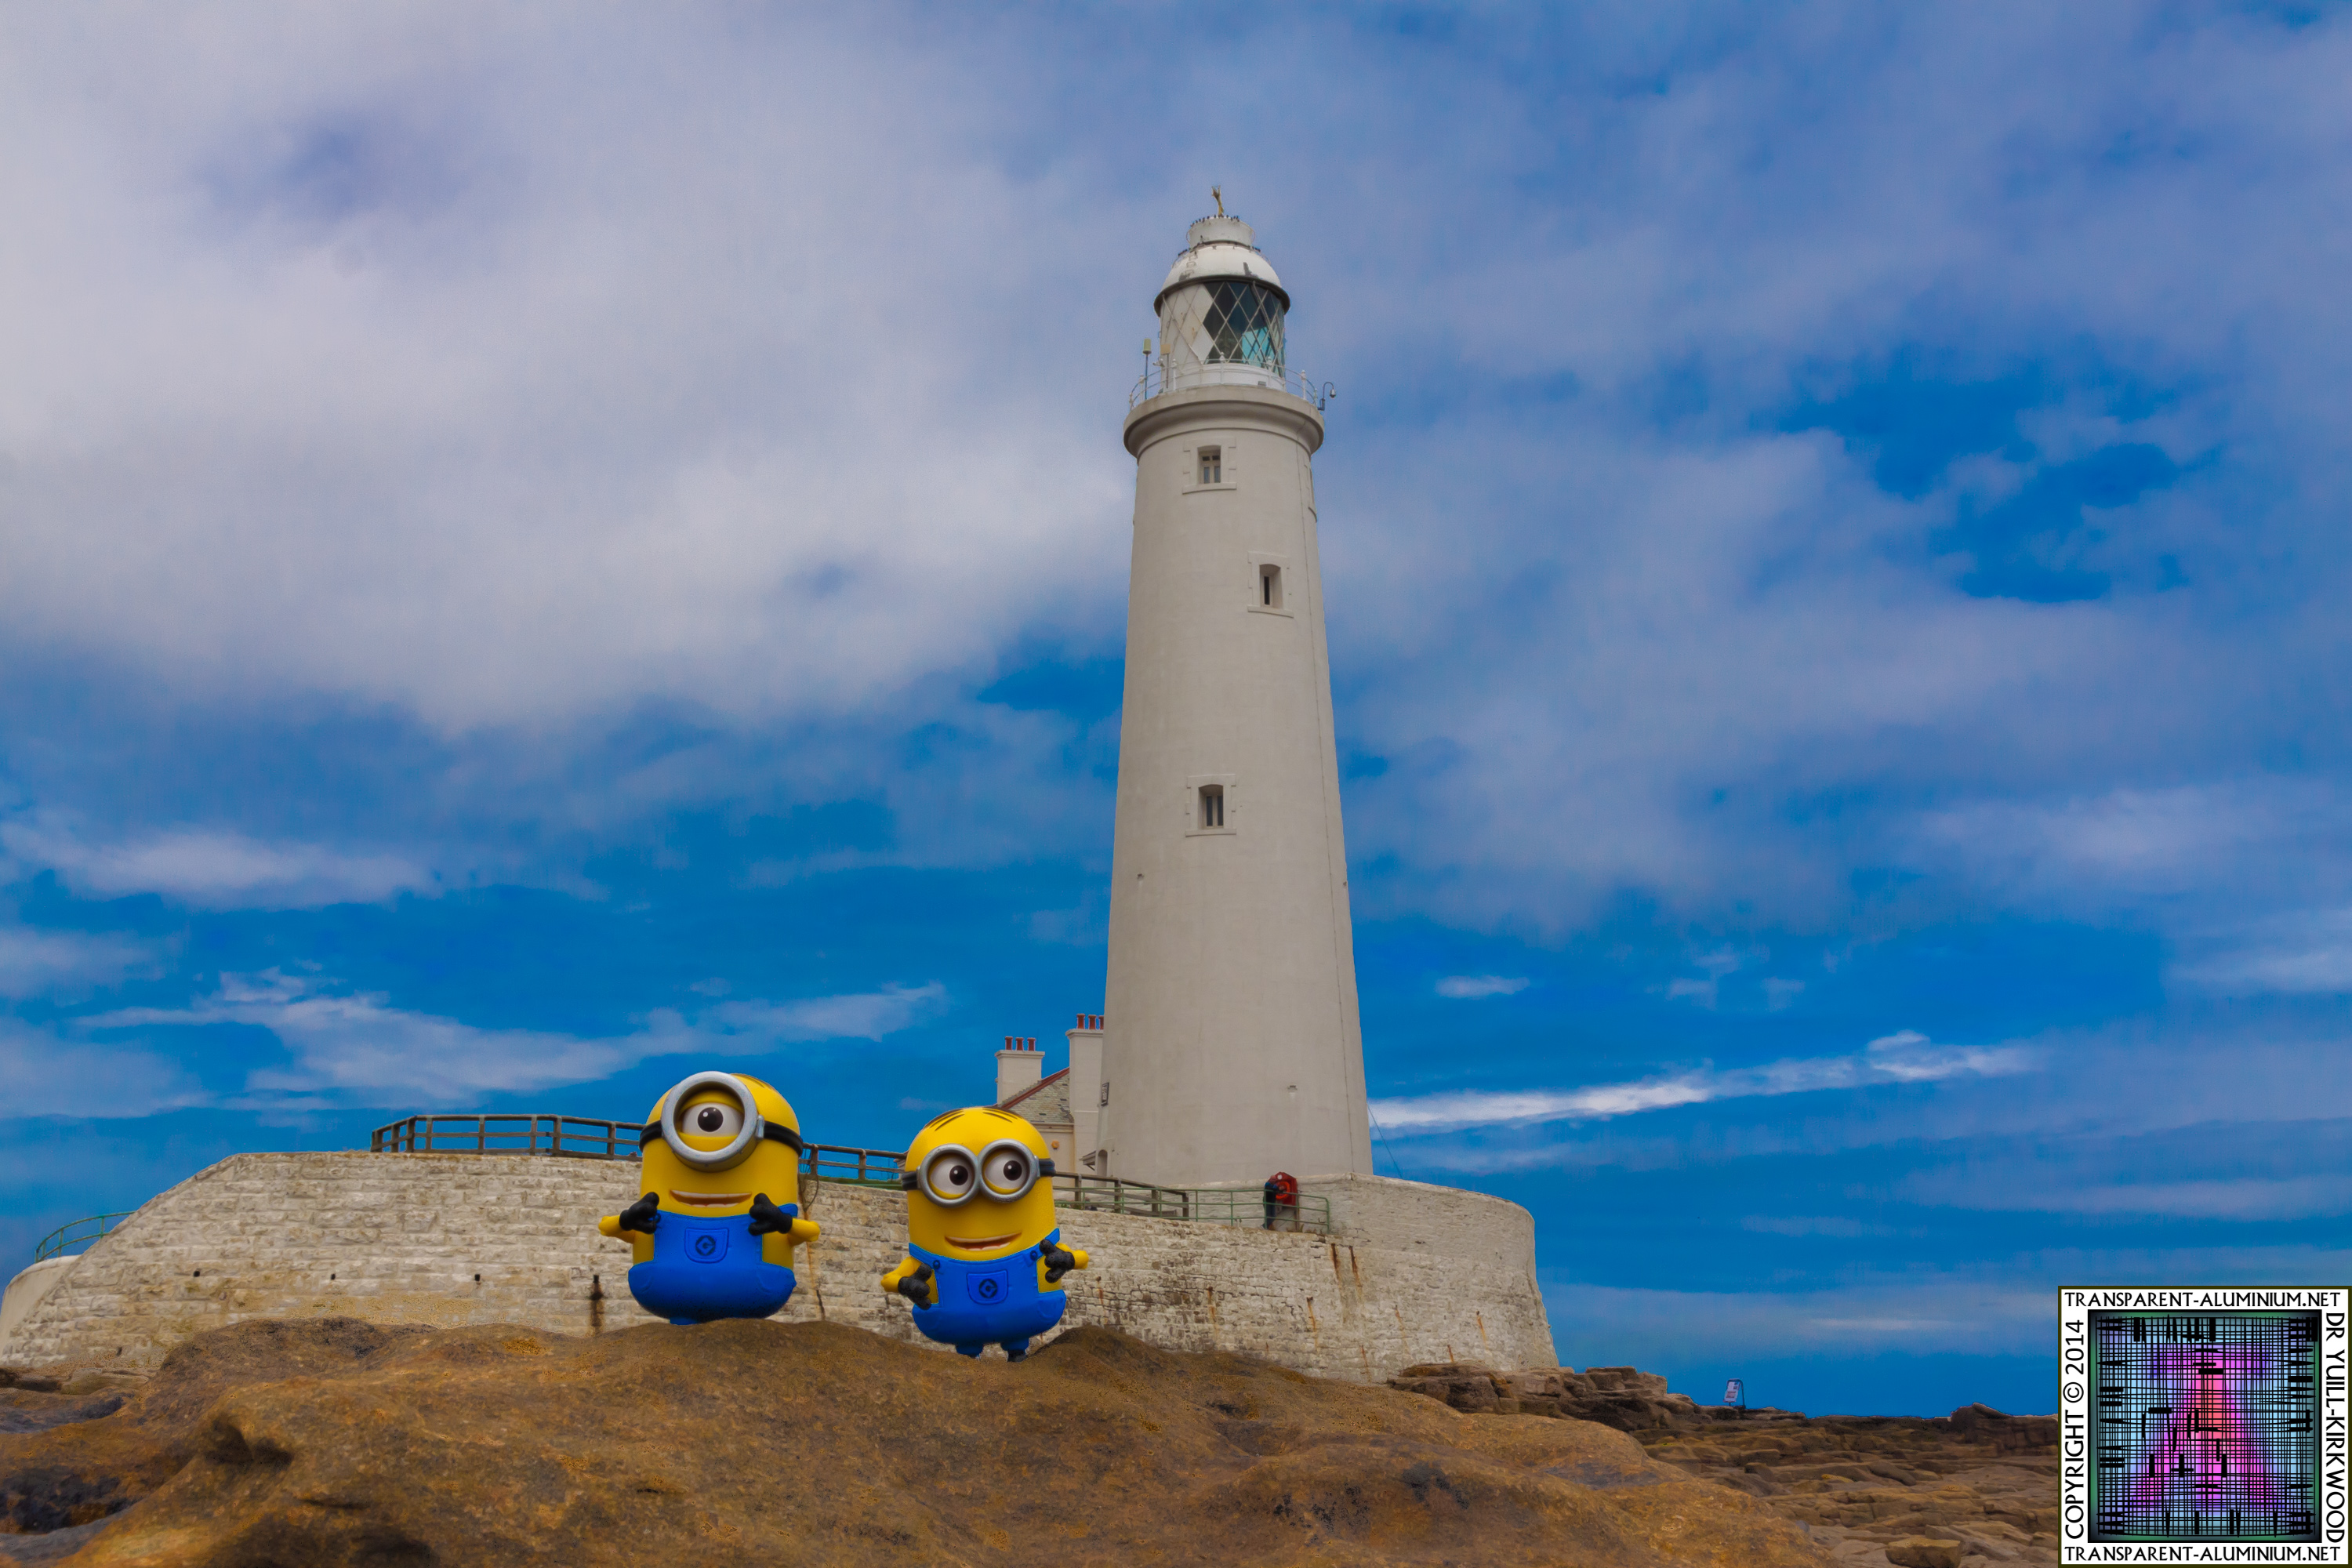 The Minions at St Mary's lighthouse.